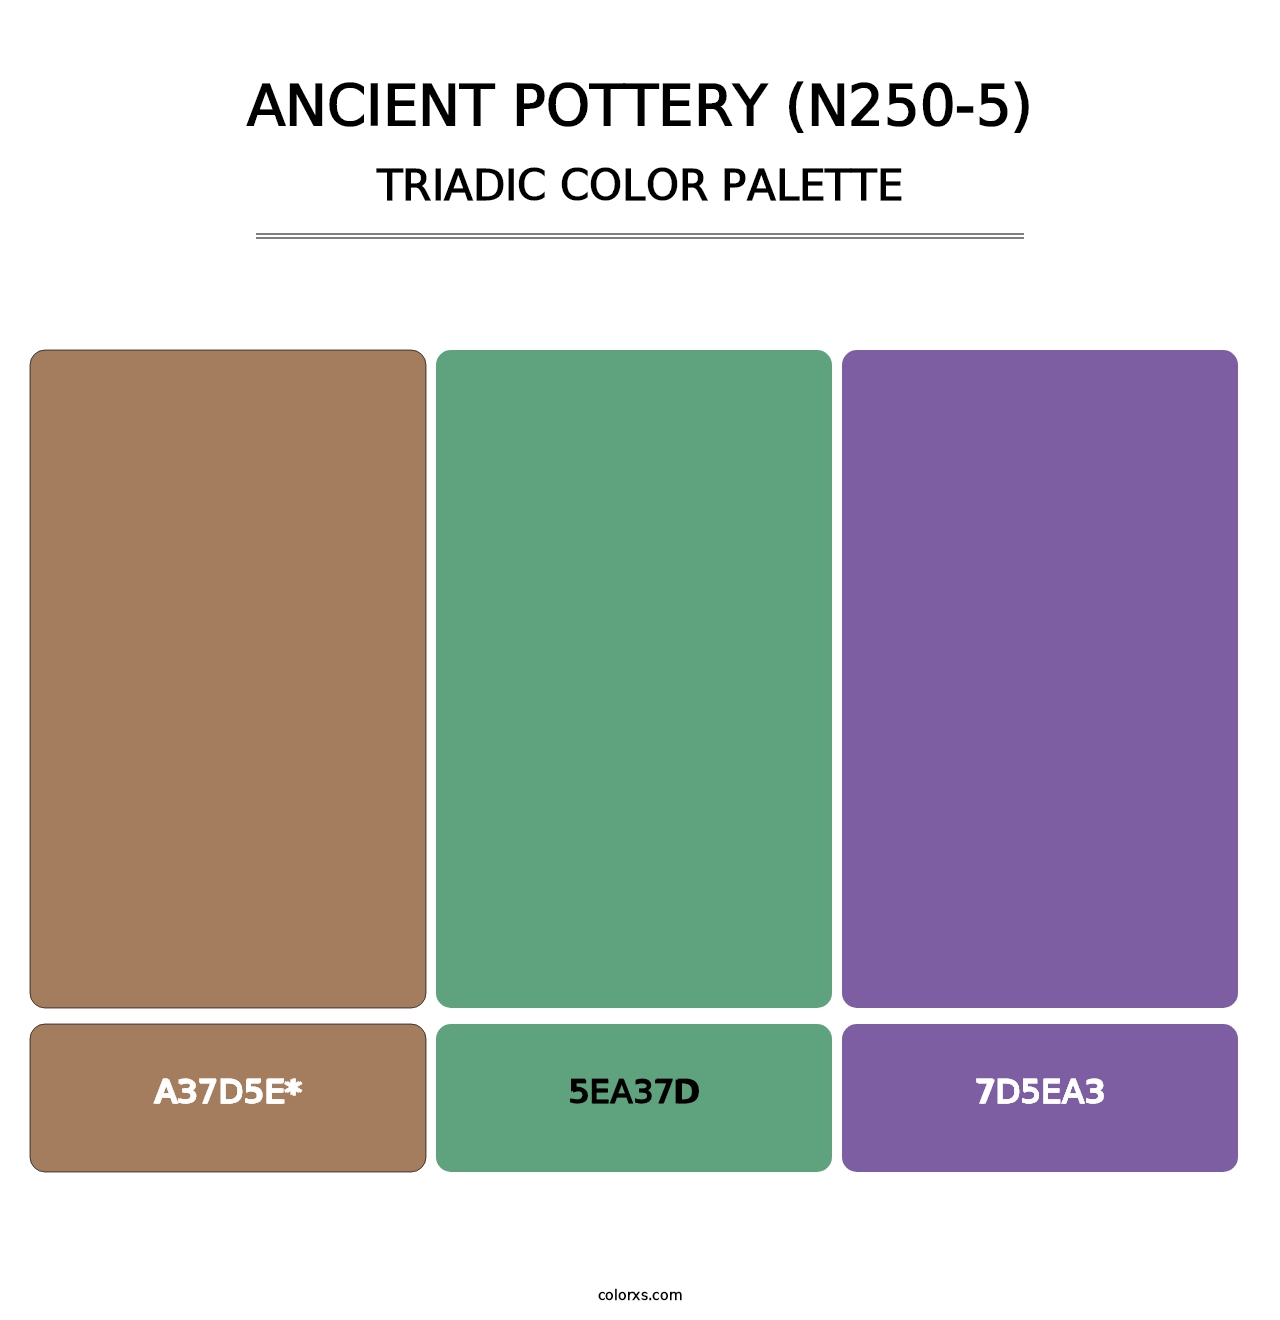 Ancient Pottery (N250-5) - Triadic Color Palette